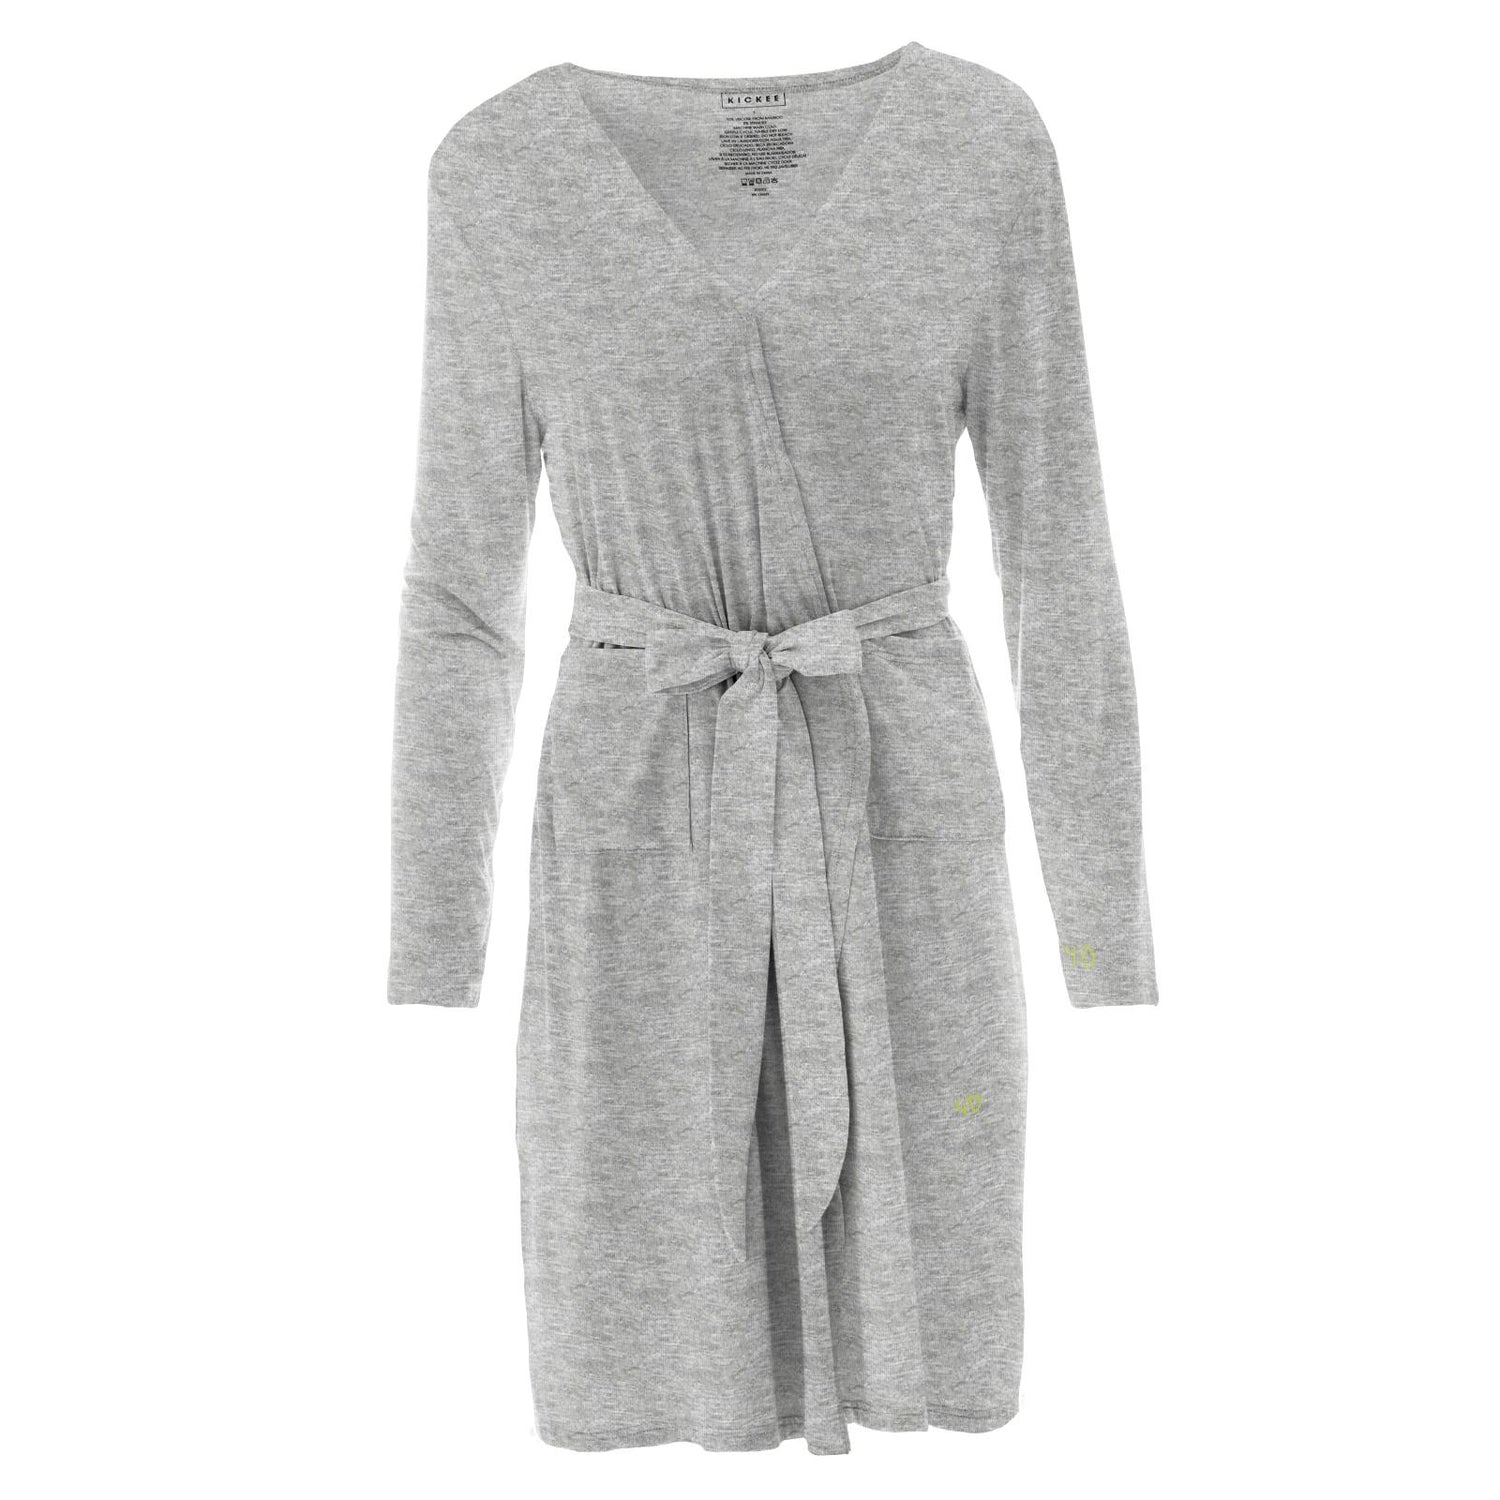 Women's Mid Length Lounge Robe in Heathered Mist